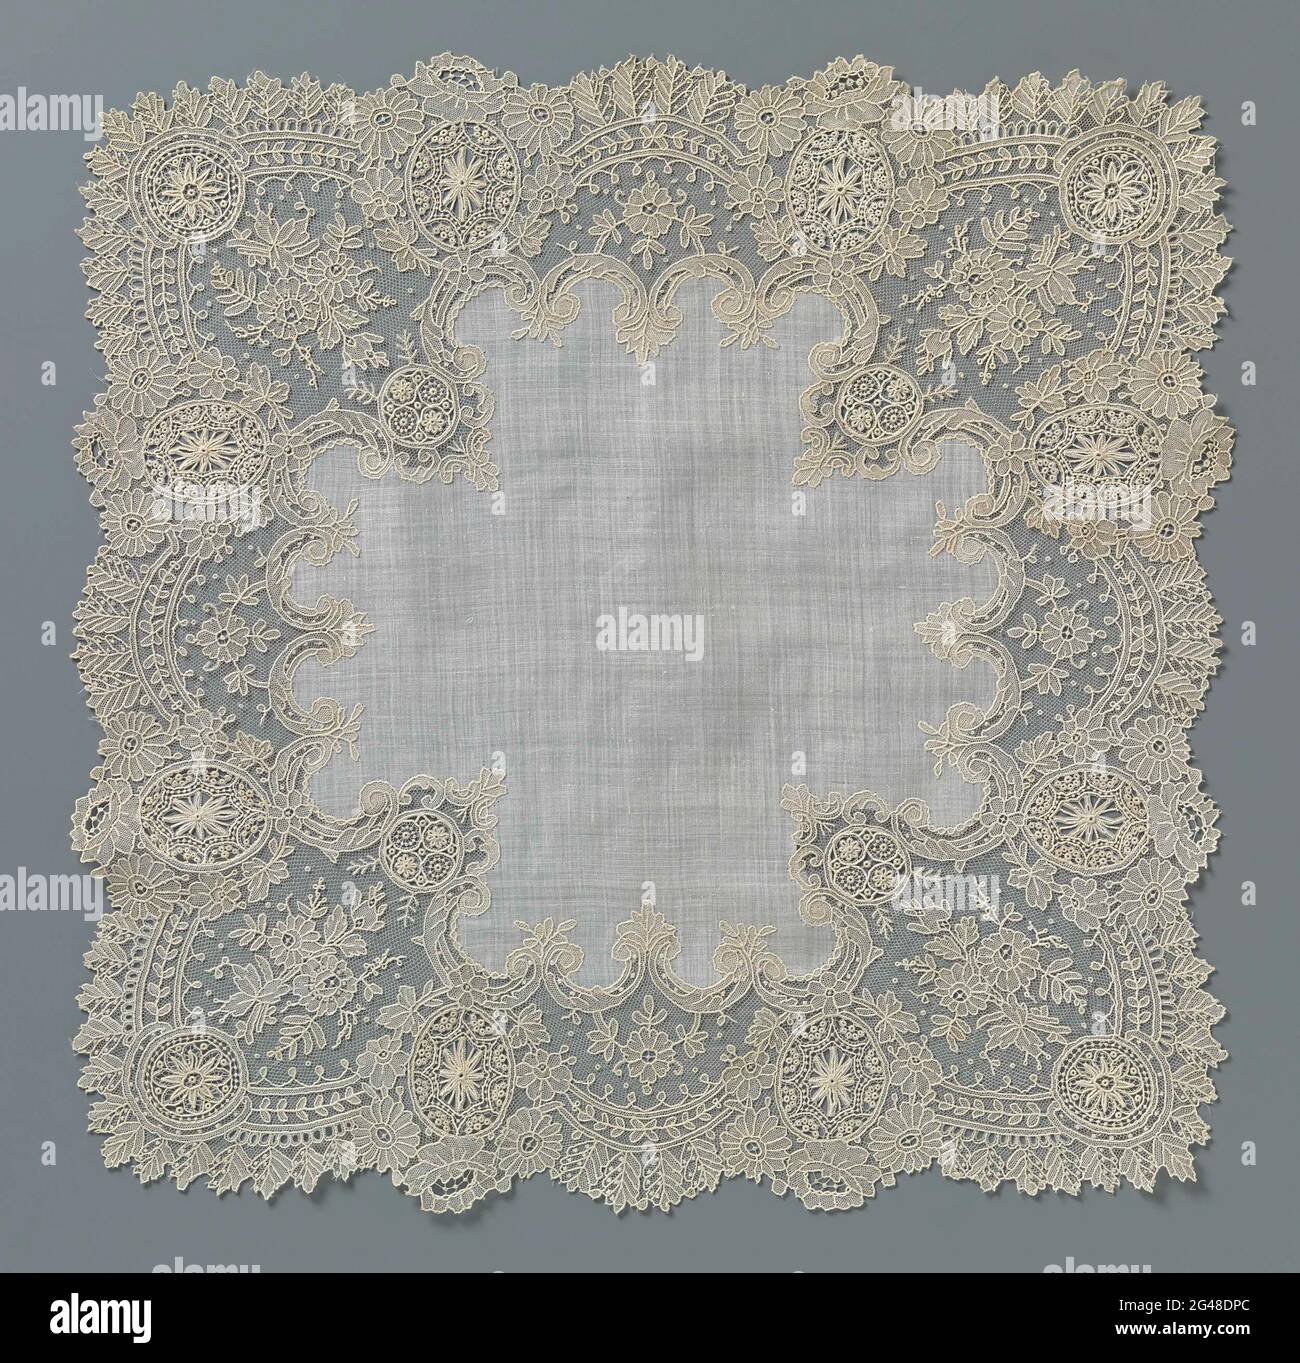 Handkerchief with a border of needle side with eight ovals and eight circles. Handkerchief with an edge of natural needle lace, Brussels mesh edge. Around a large cross-shaped batters center piece runs a narrow edge edge with eight deep shelters, the closing pieces of which are formed by eight ovals. The angular shells each exhibit two above-standing circles. The sculpture consists of a leaf branch and a edge of leaves, which form the scallops. Small, hollow C-Volutes form the inner edge. Stock Photo